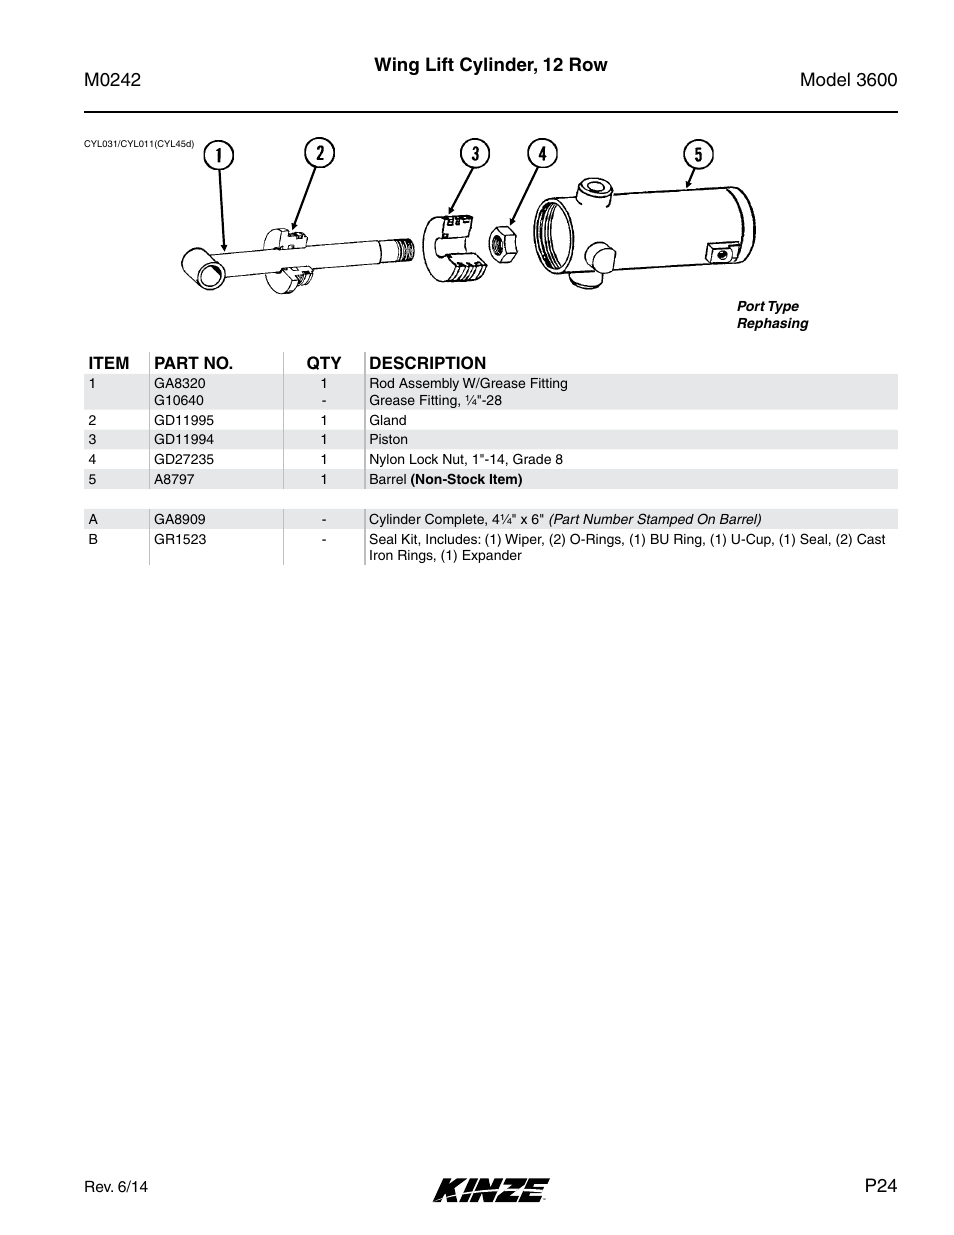 Wing lift cylinder, 12 row | Kinze 3600 Lift and Rotate Planter Rev. 6/14 User Manual | Page 27 / 40